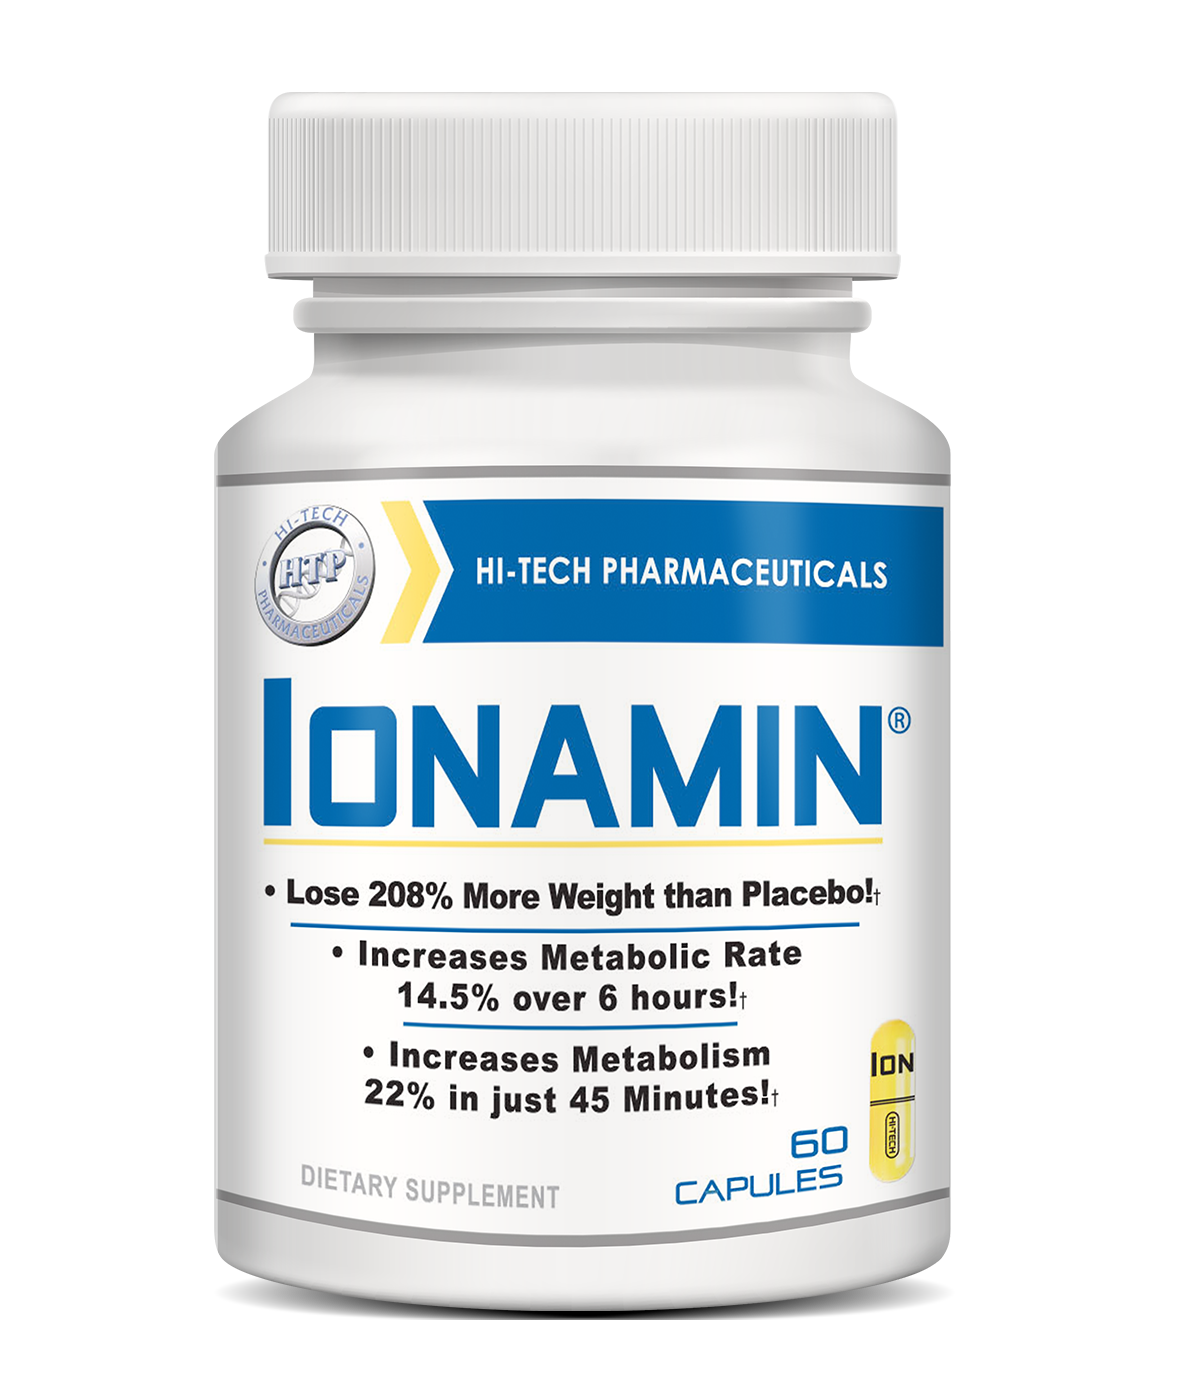 Hi-Tech Pharmaceuticals Announces OTC Nationwide Launch of New Diet Pill -- Ionamin® -- Backed by Clinical Study